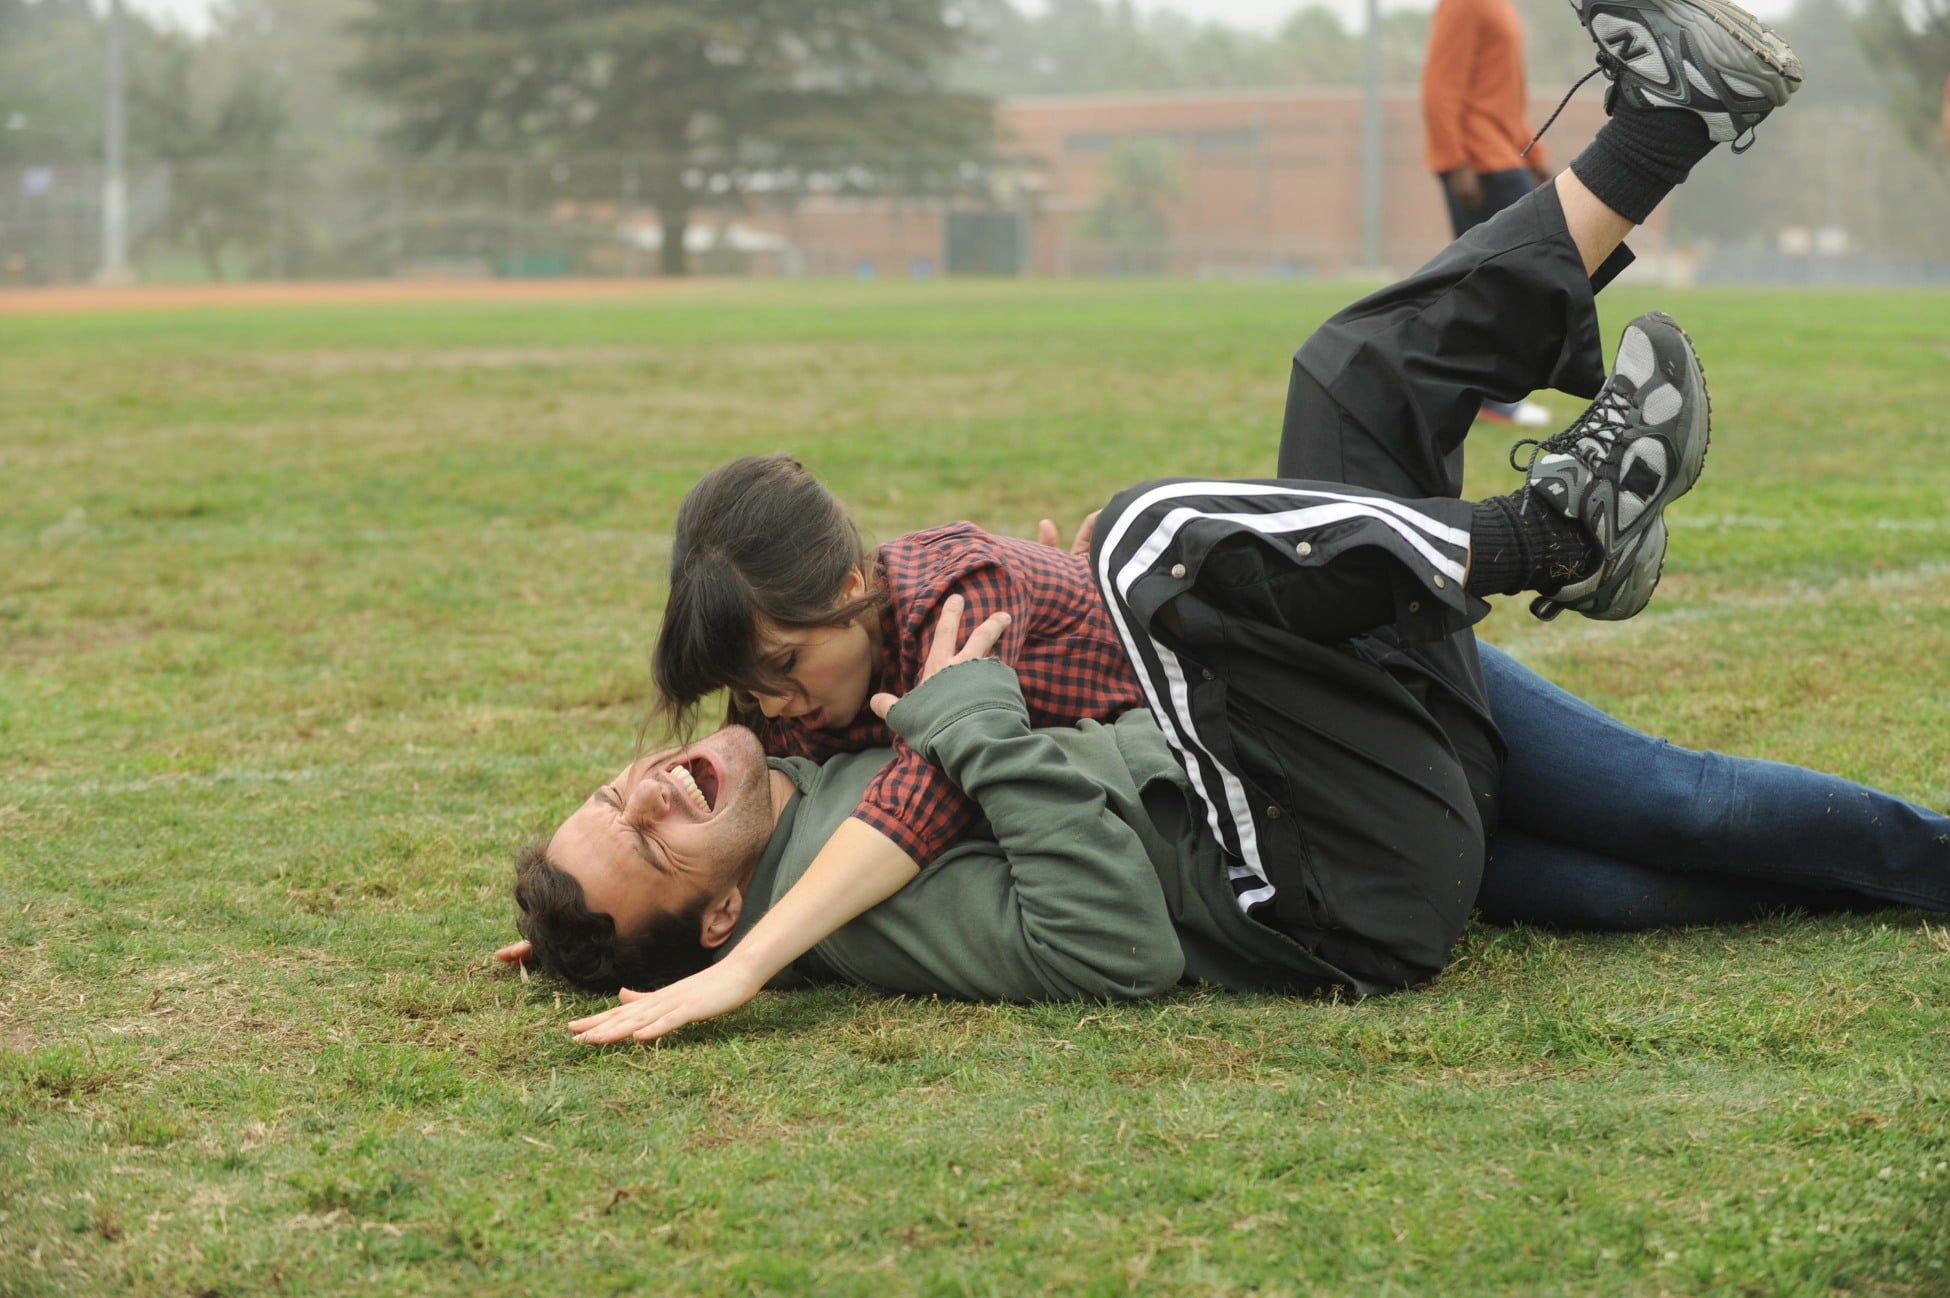 It may just be a touch-football game, but their playful sides make | Nick  and Jess's Cutest Moments on New Girl | POPSUGAR Entertainment Photo 3